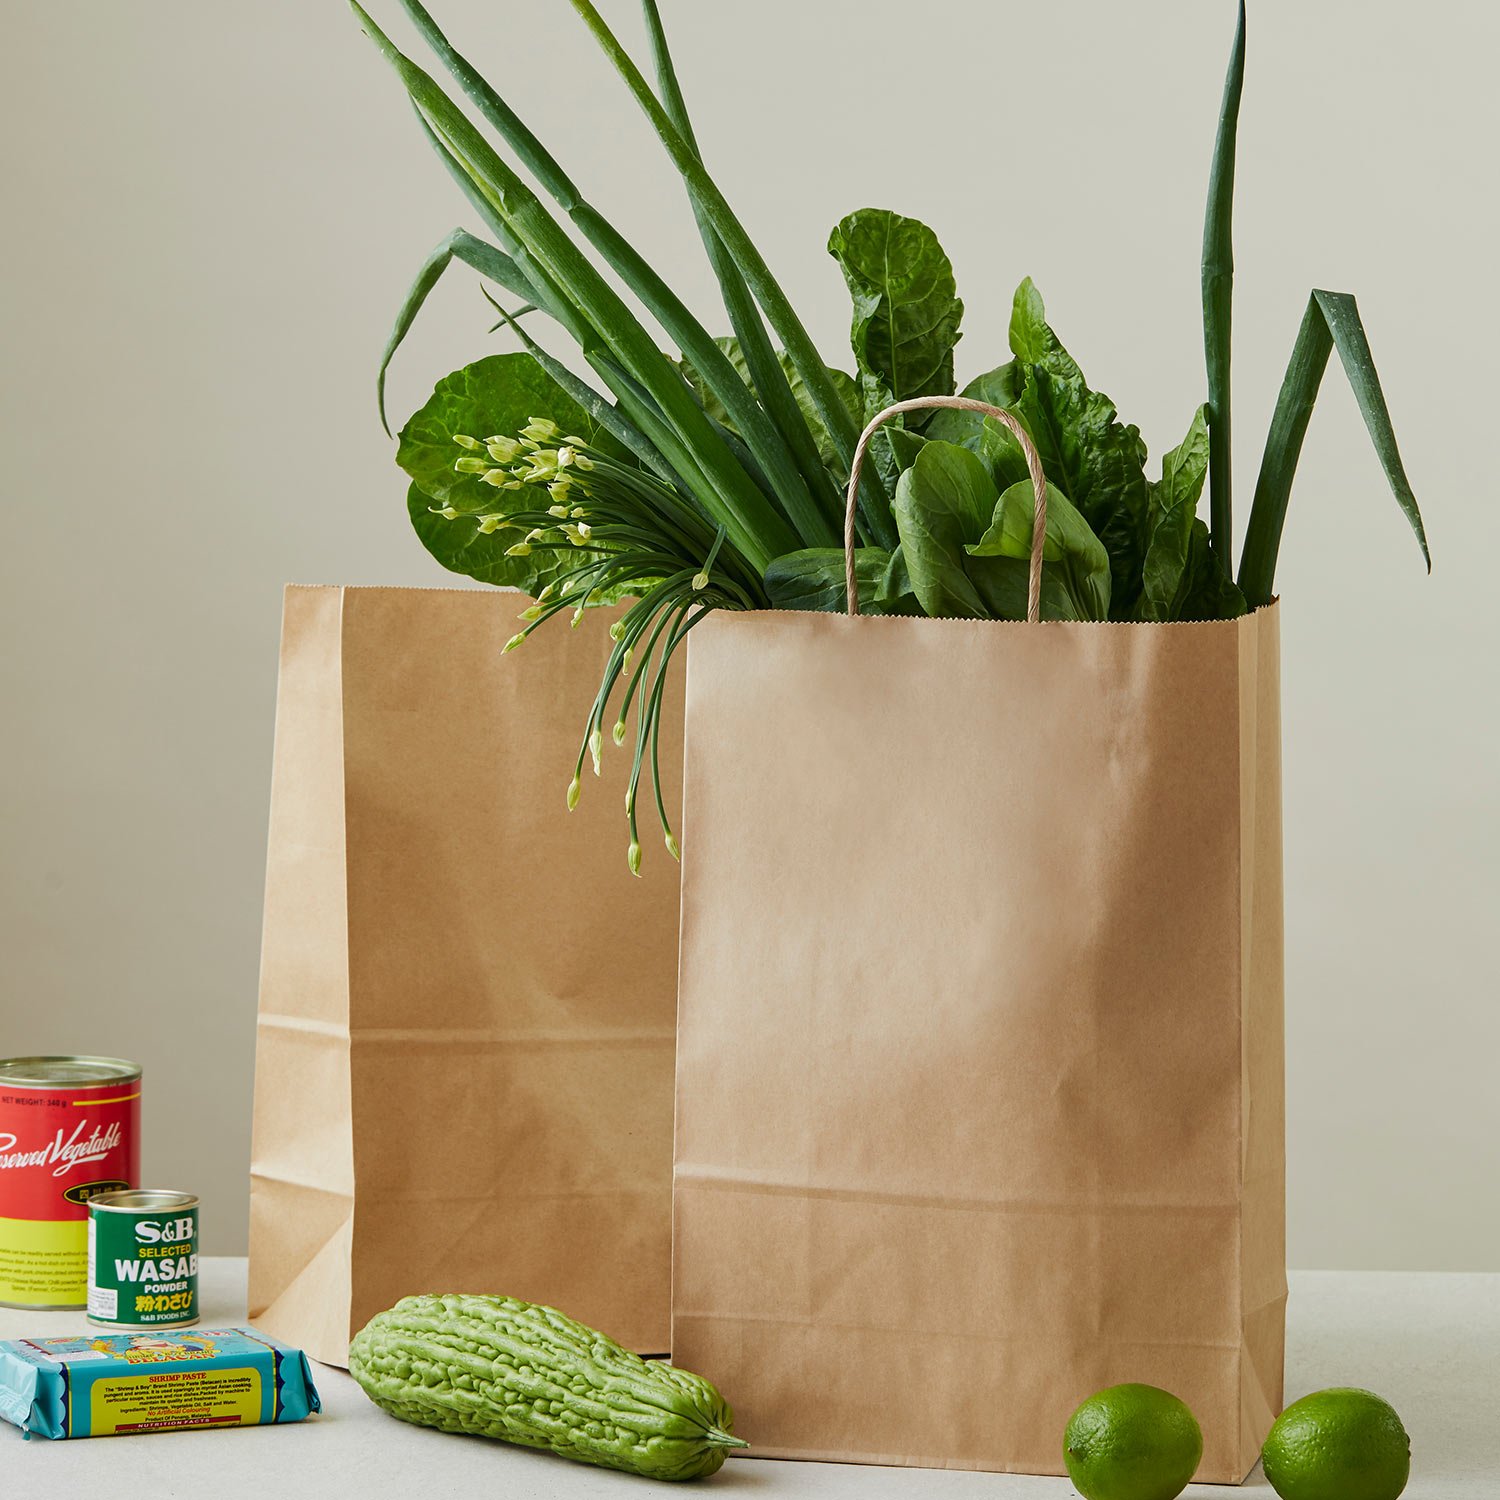 Image of paper bags used for groceries